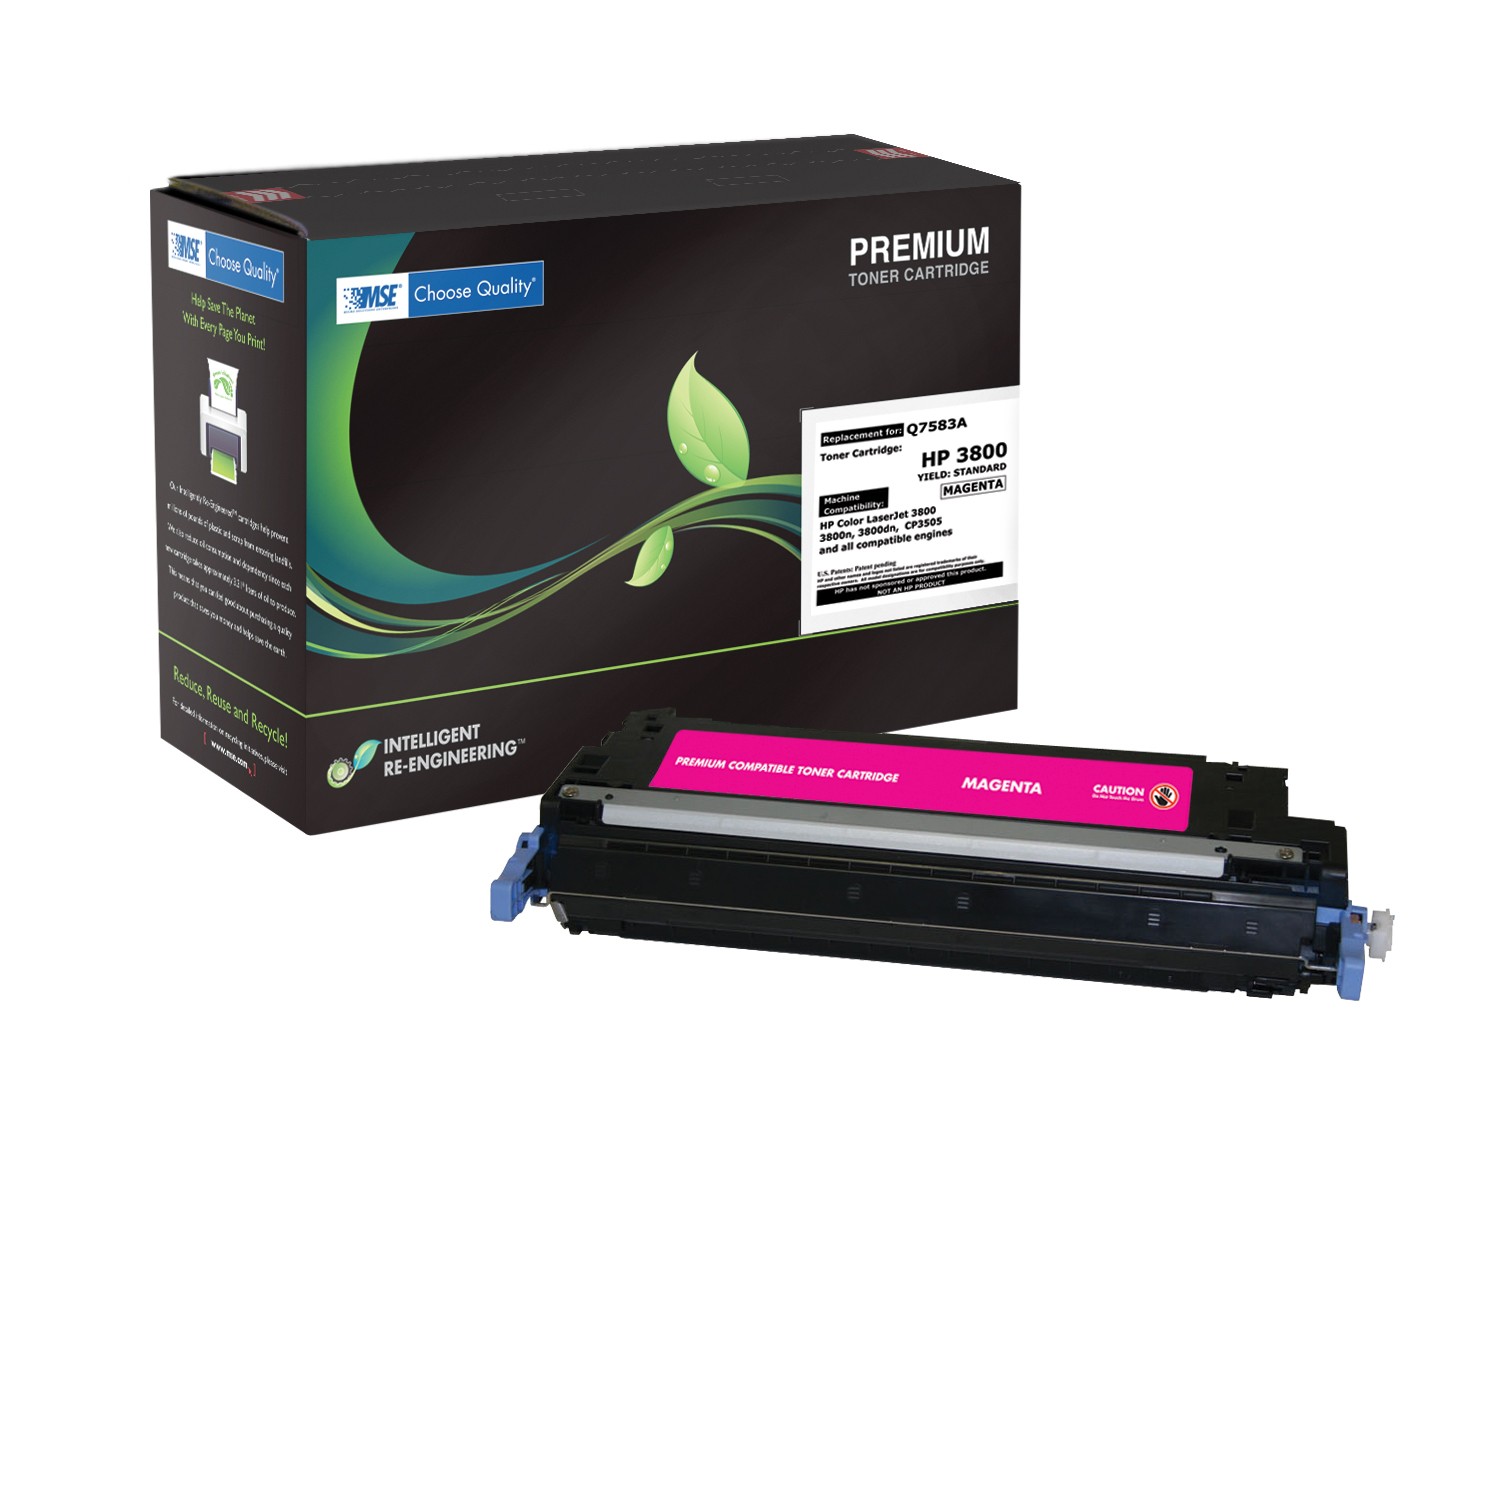 HP Q7583A, Q7583, 503A Brand New Compatible Color( Magenta ) Laser Toner Cartridge with CHIP 02-21-80314